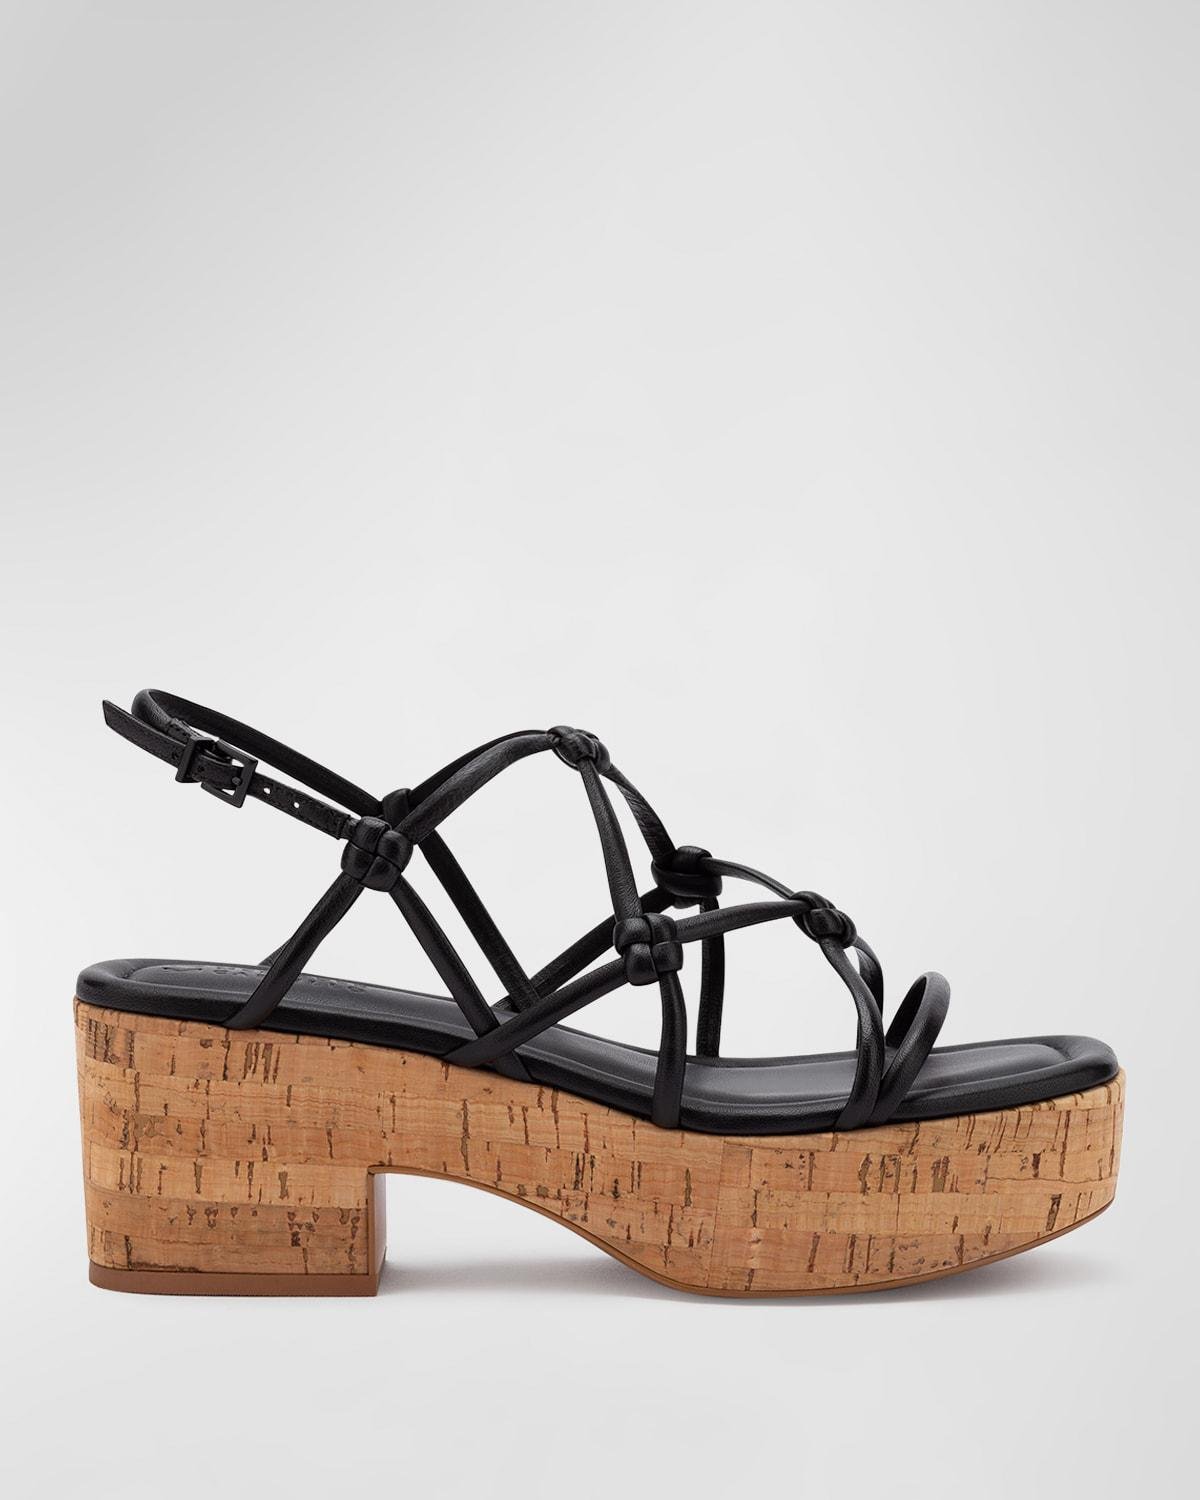 Camille Knotted Leather Platform Sandals by MERCEDES CASTILLO | jellibeans